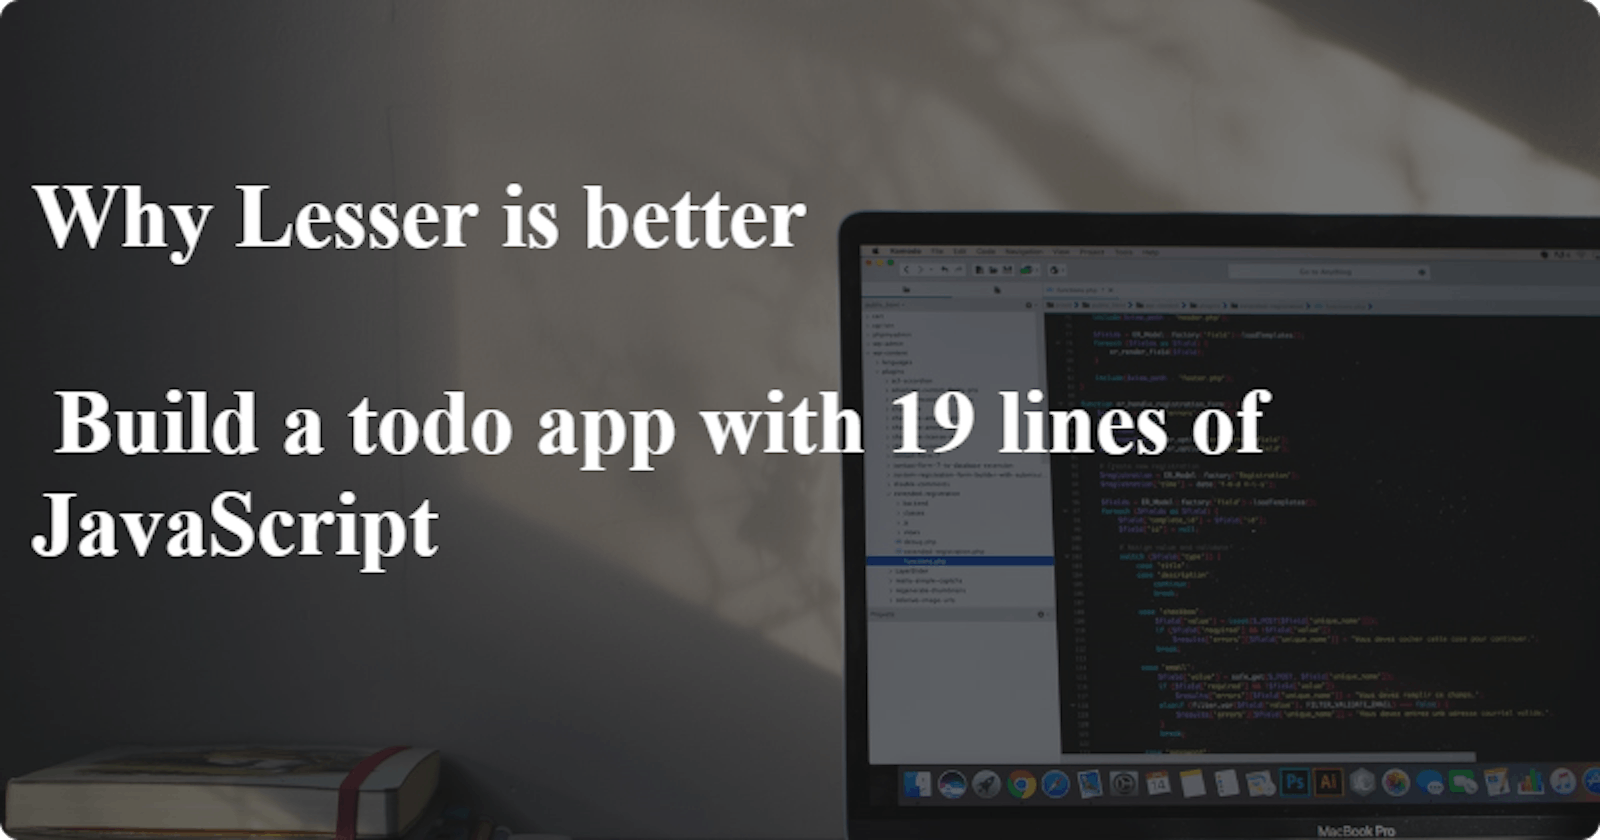 Why Lesser is better - Build a todo app with 19 lines of JavaScript